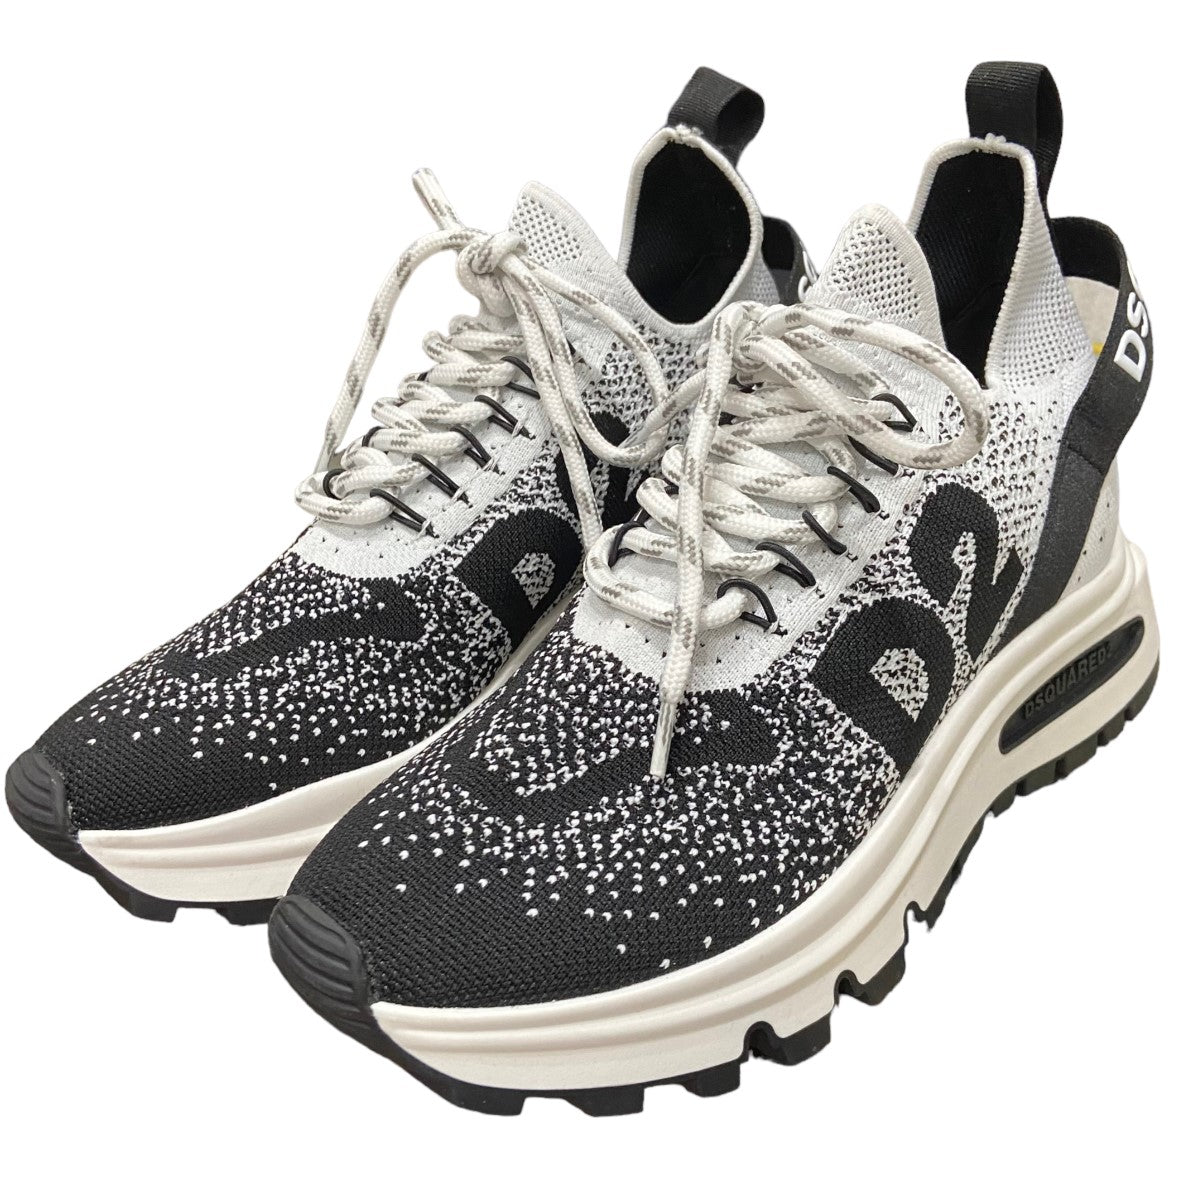 DSQUARED2(ディースクエアード) 「 RUN DS2 SNEAKERS」ニット素材 ...